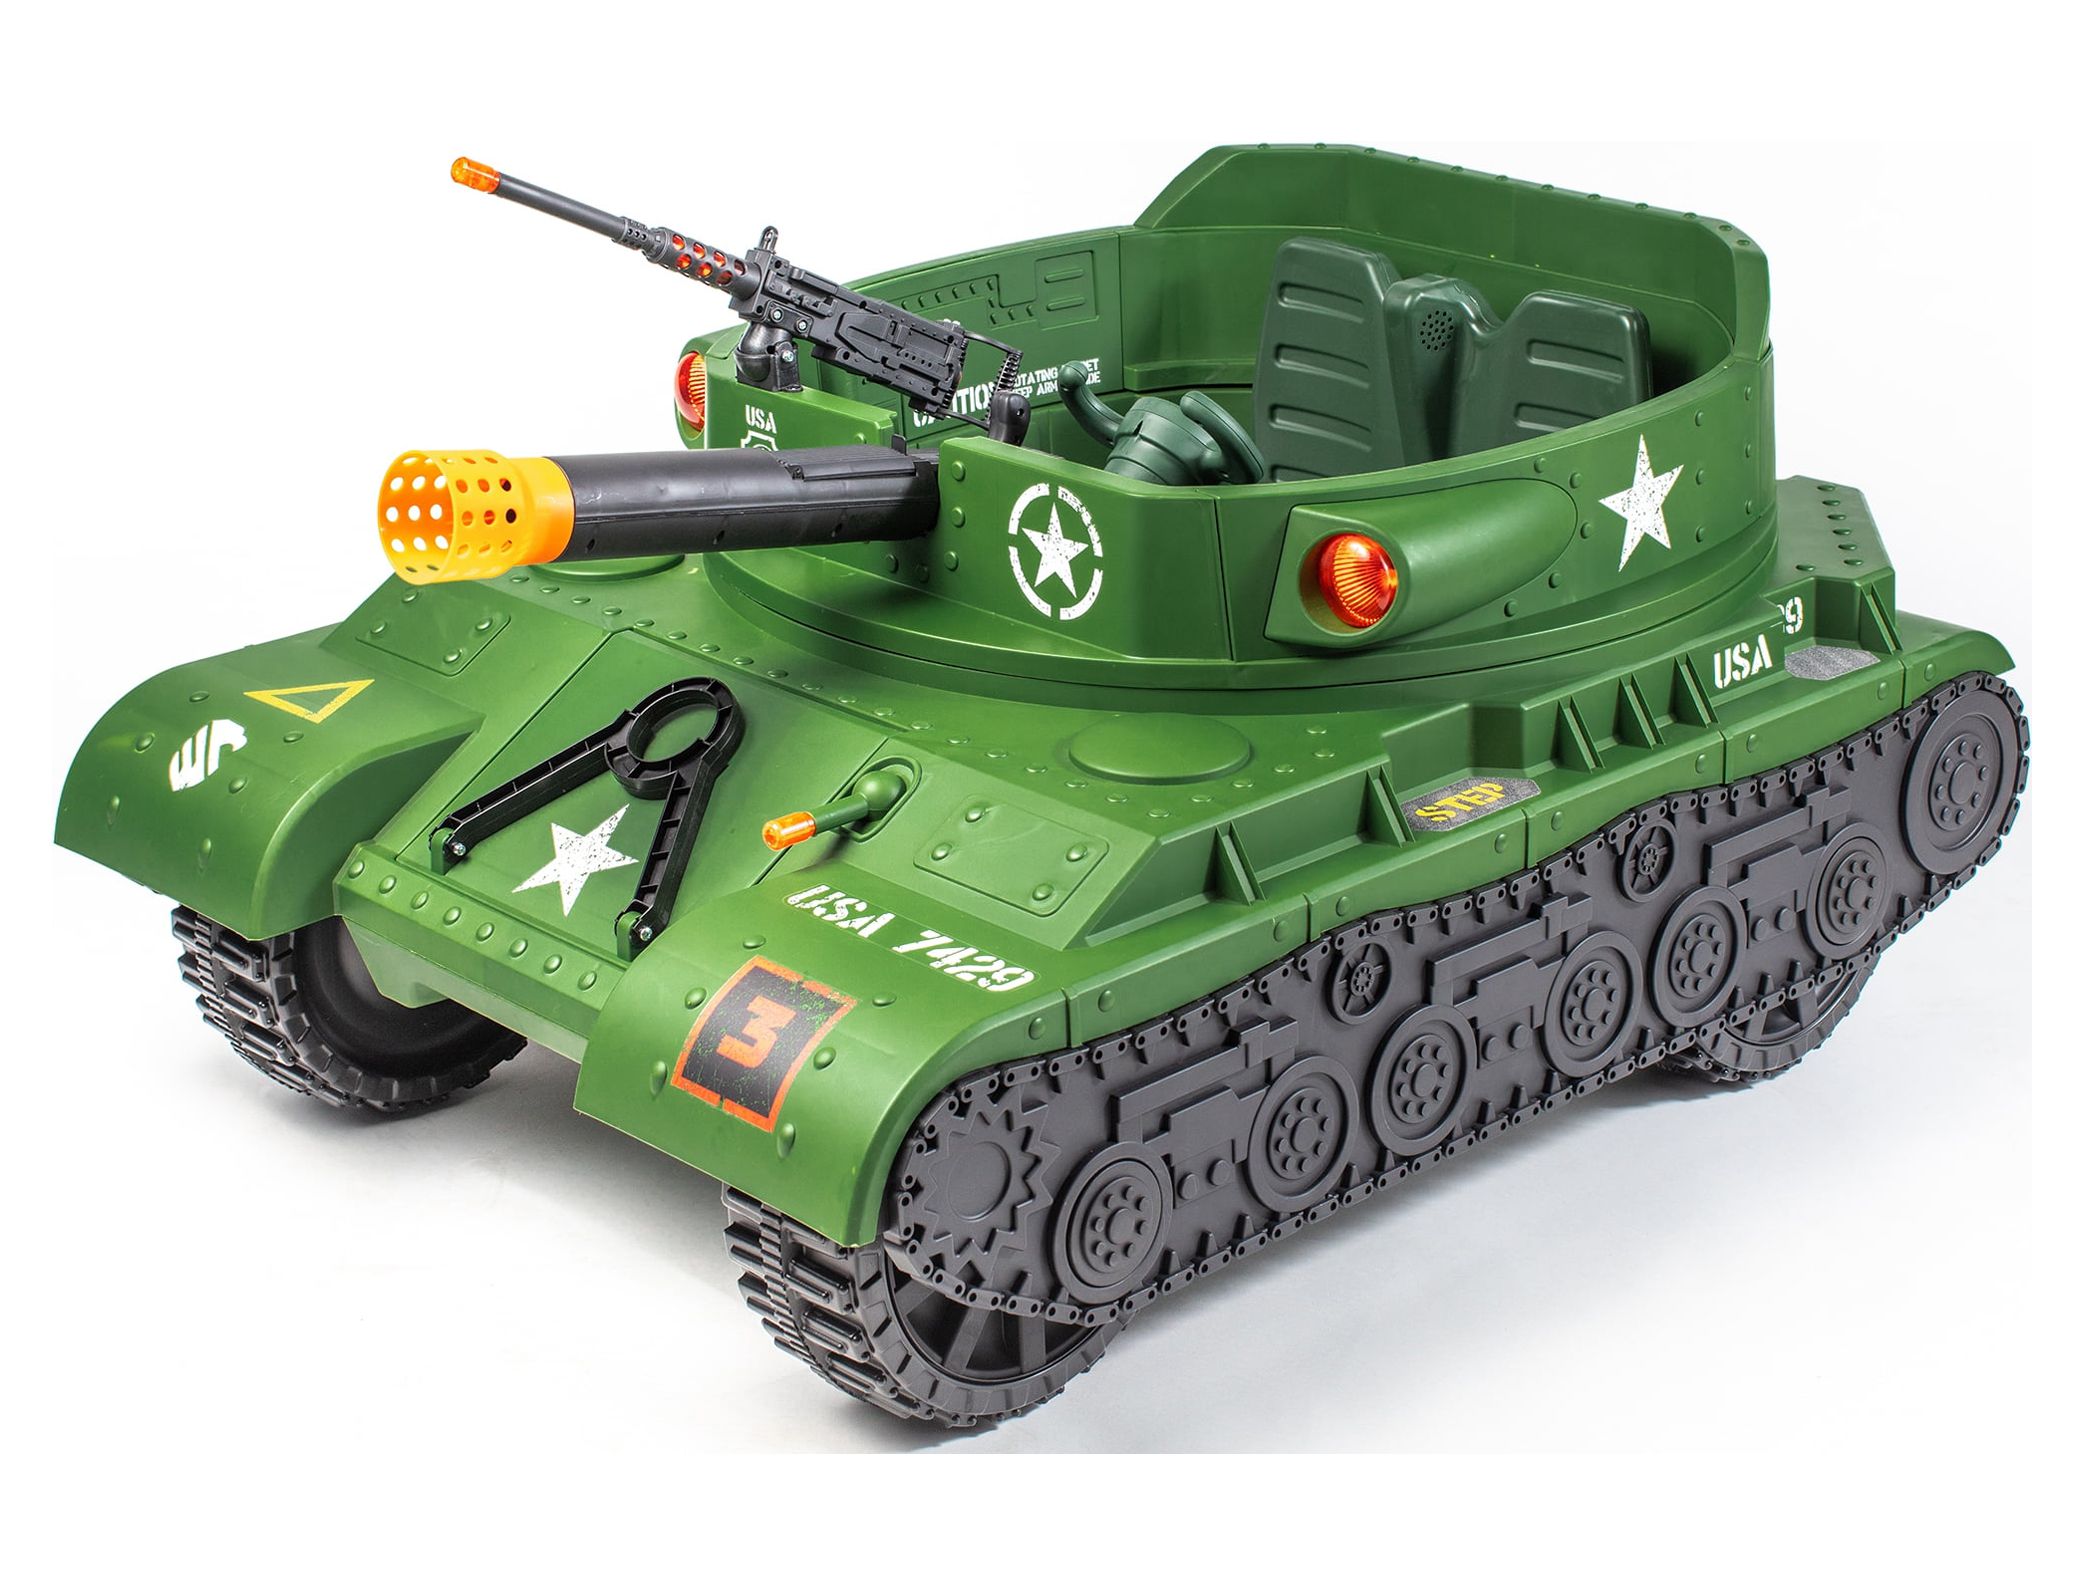 NEW WALMART EXCLUSIVE Adventure Force 24 Volt Thunder Tank GREEN Ride-On With Working Cannon and Rotating Turret! For Boys & Girls Ages 3 and up - image 4 of 26